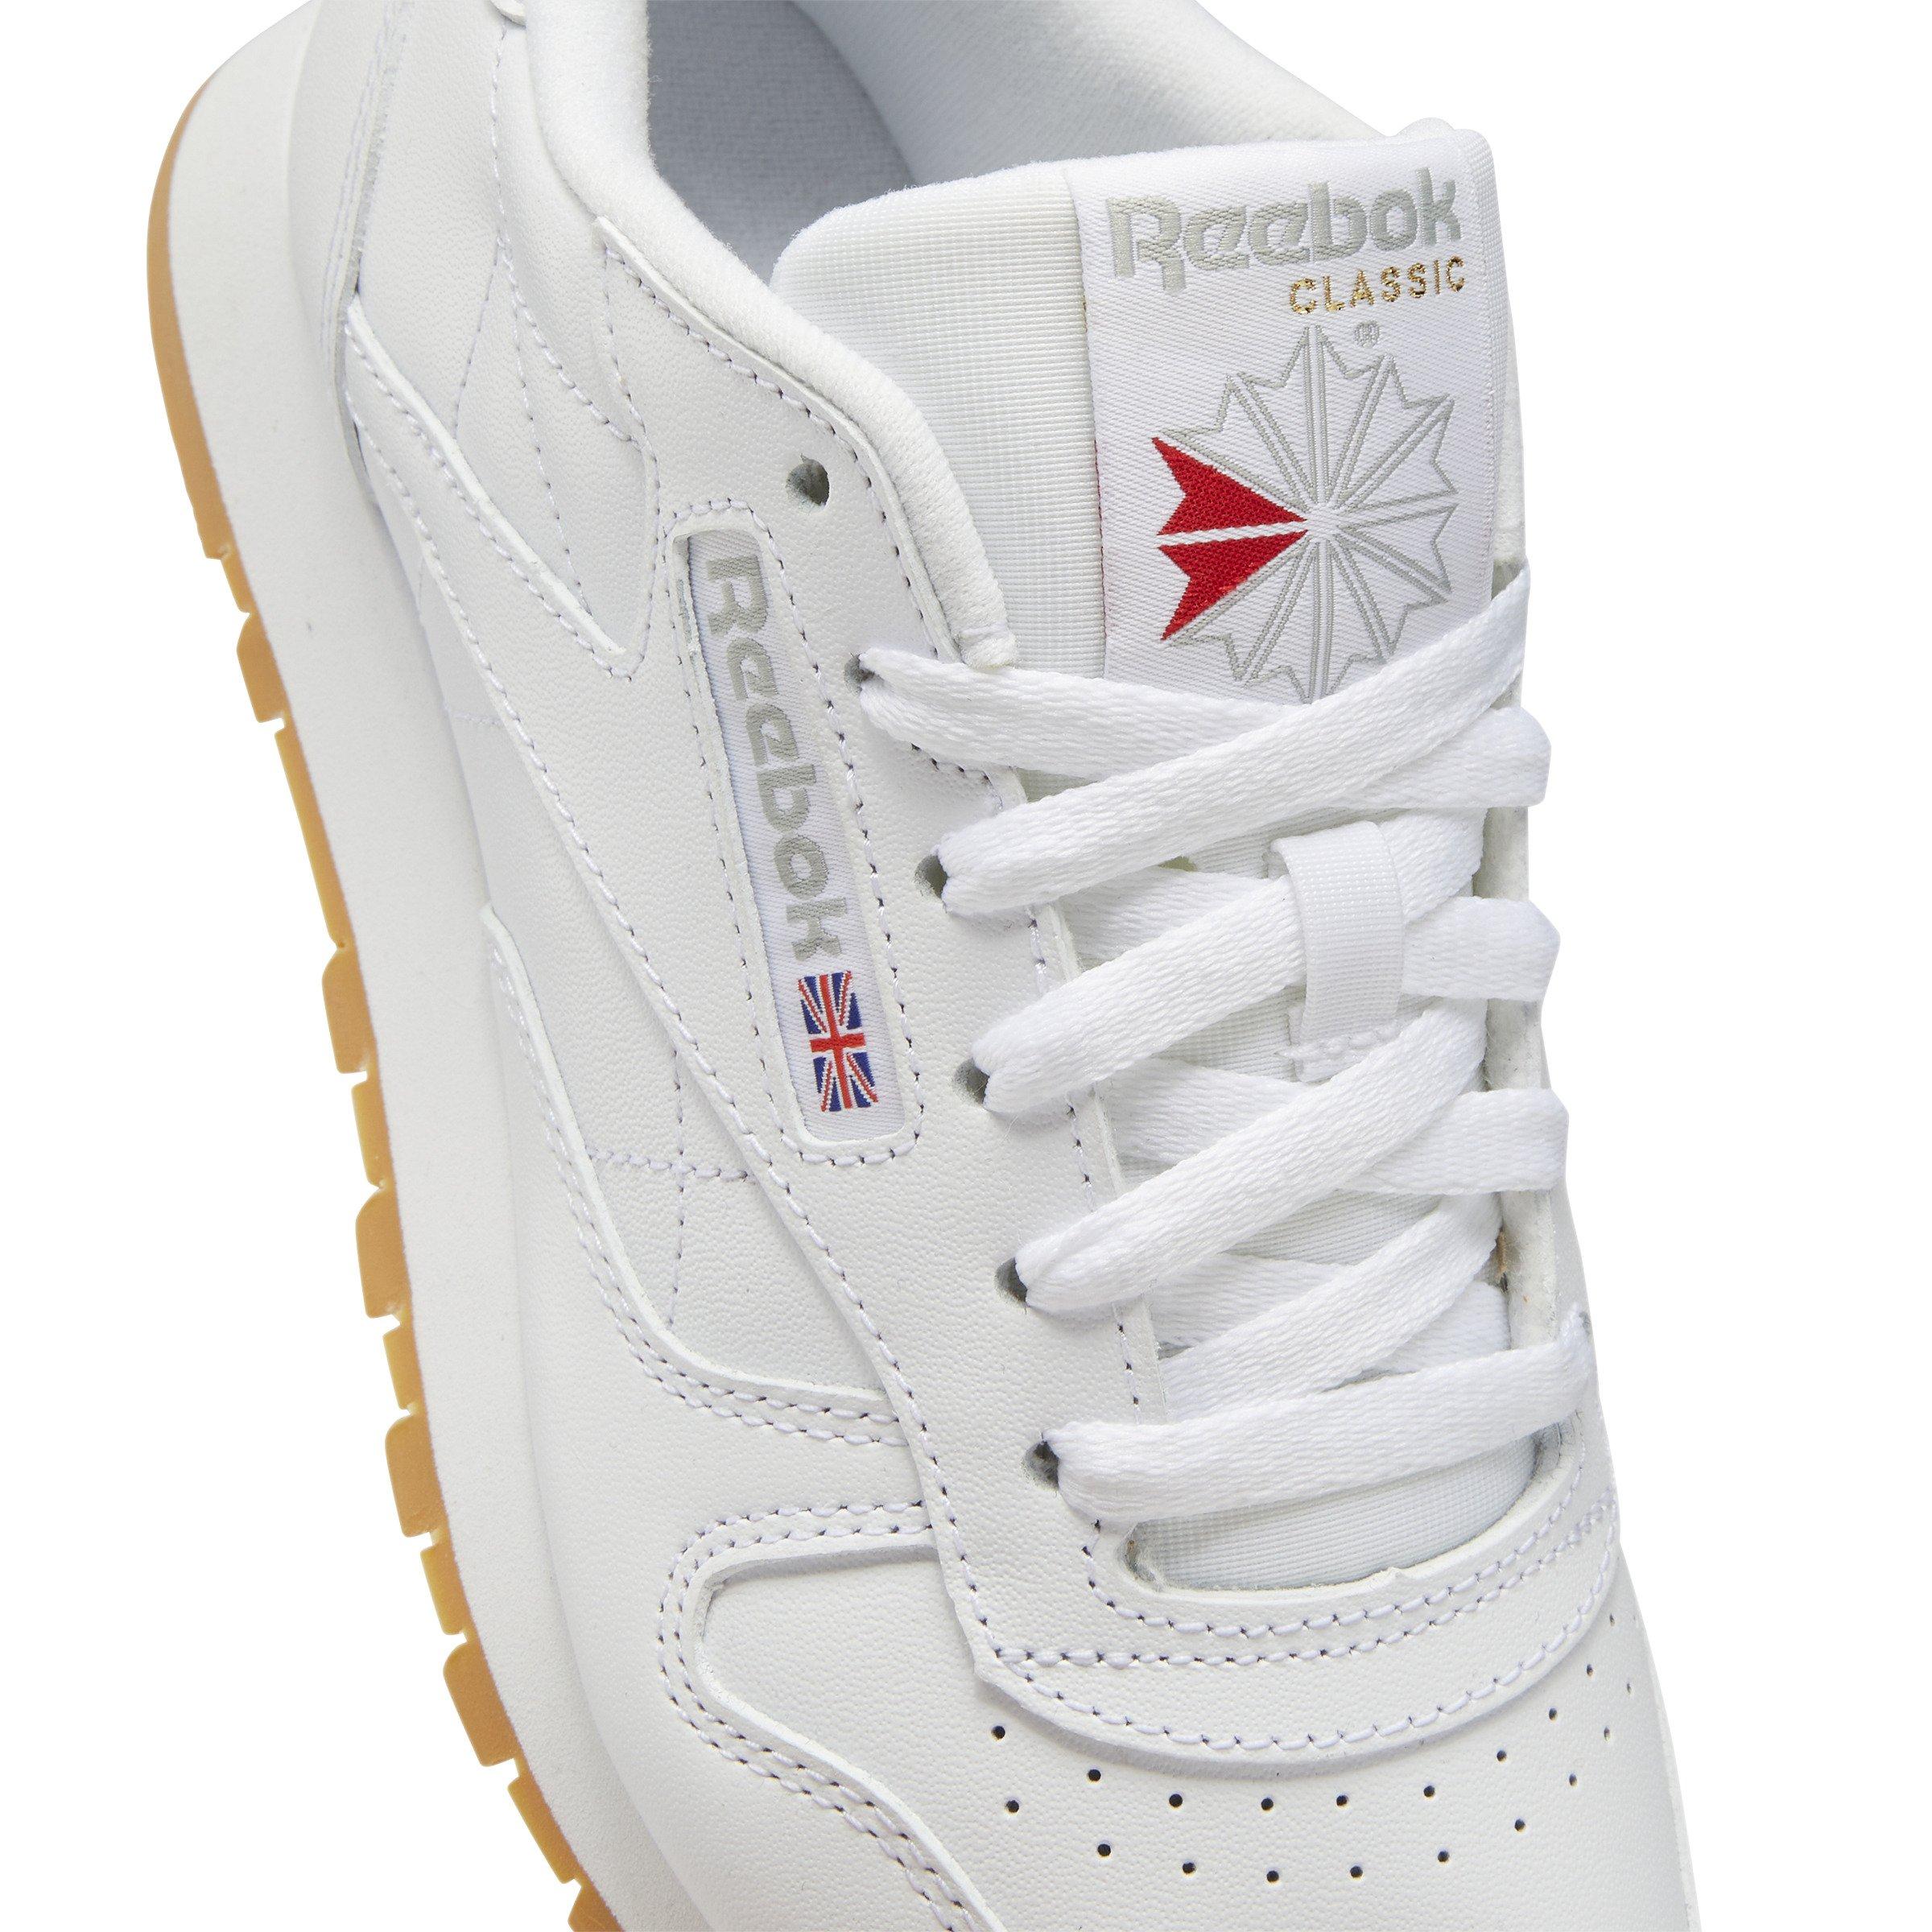 Reebok Women's Classic Leather in Cloud White/Cloud White/Pure